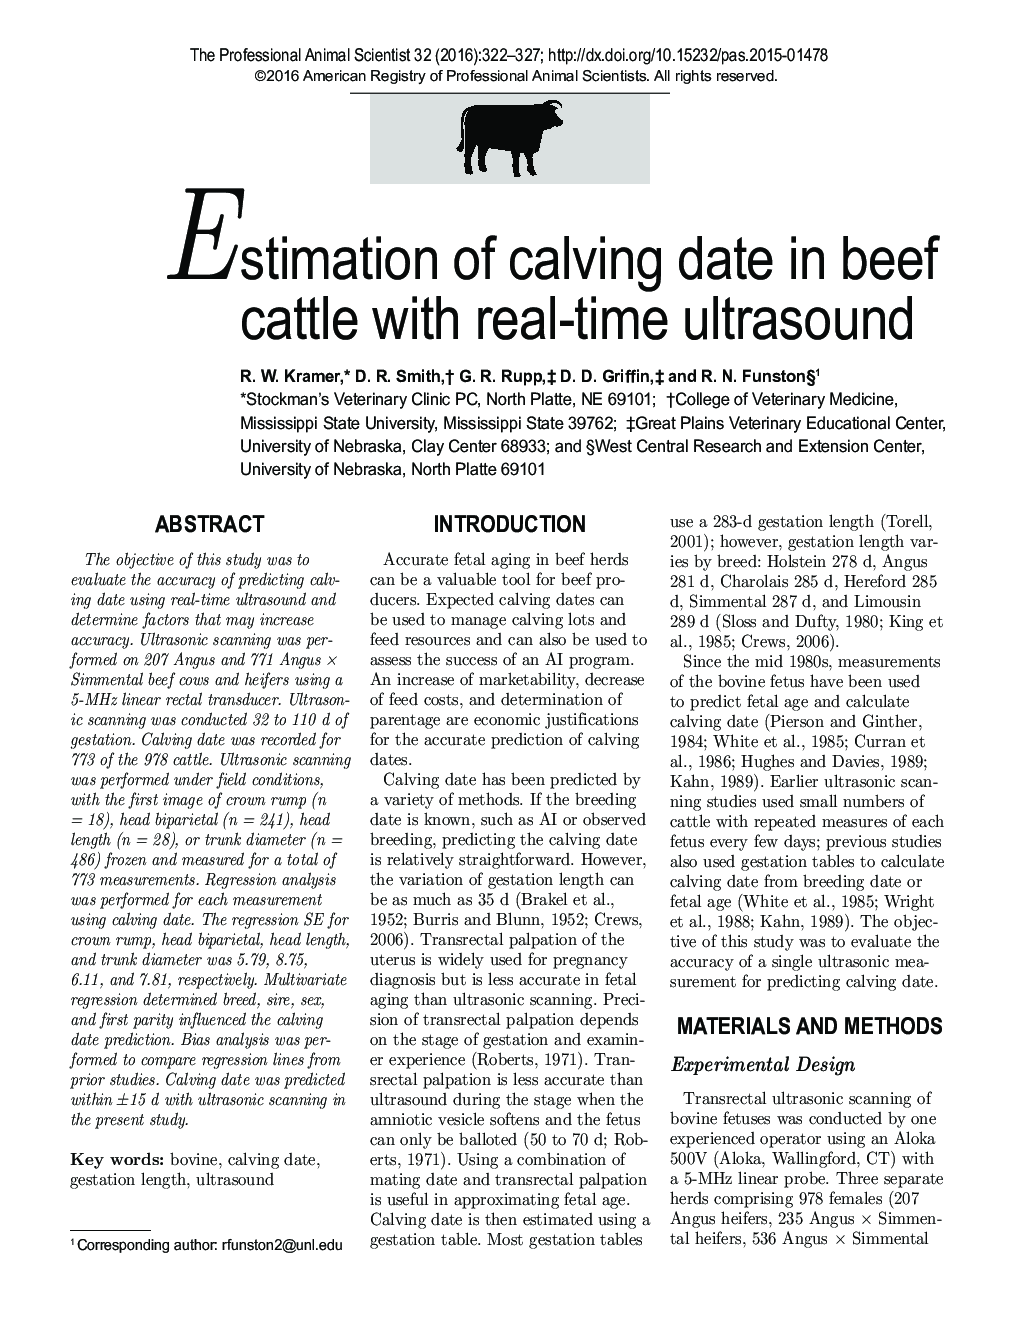 Estimation of calving date in beef cattle with real-time ultrasound